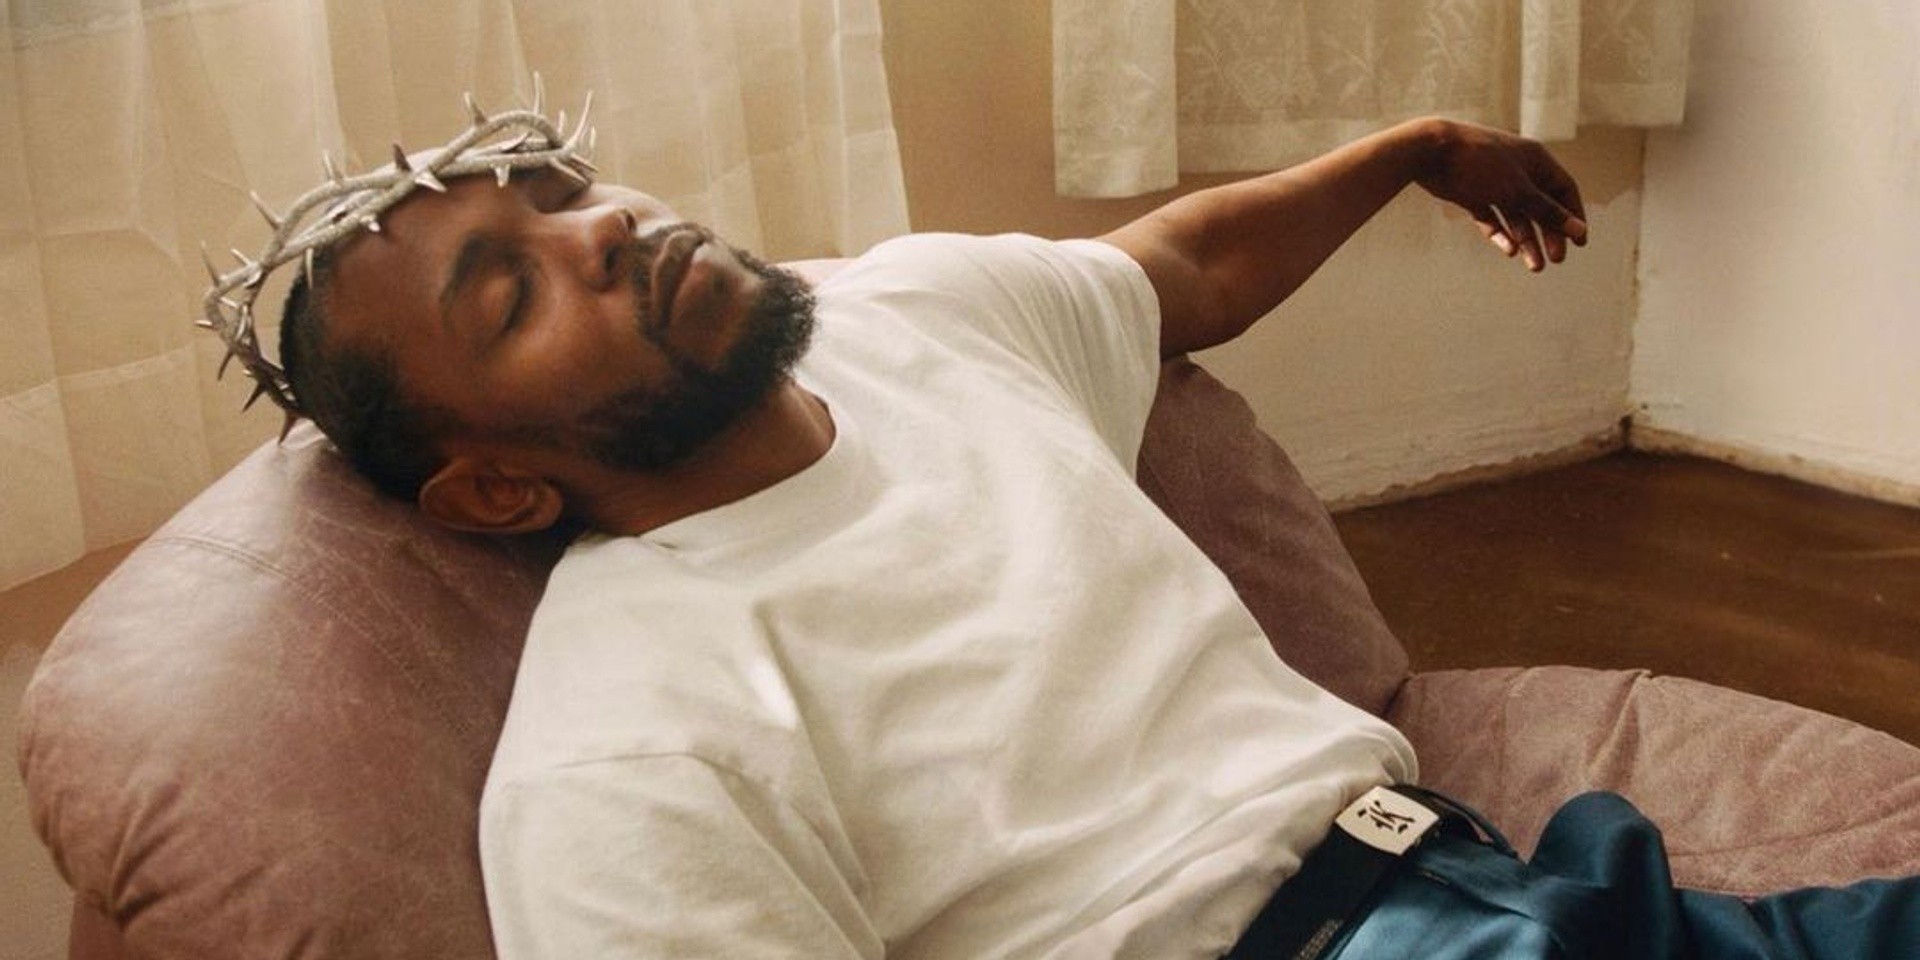 Kendrick Lamar drops highly anticipated album 'Mr. Morale & The Big Steppers' — listen 